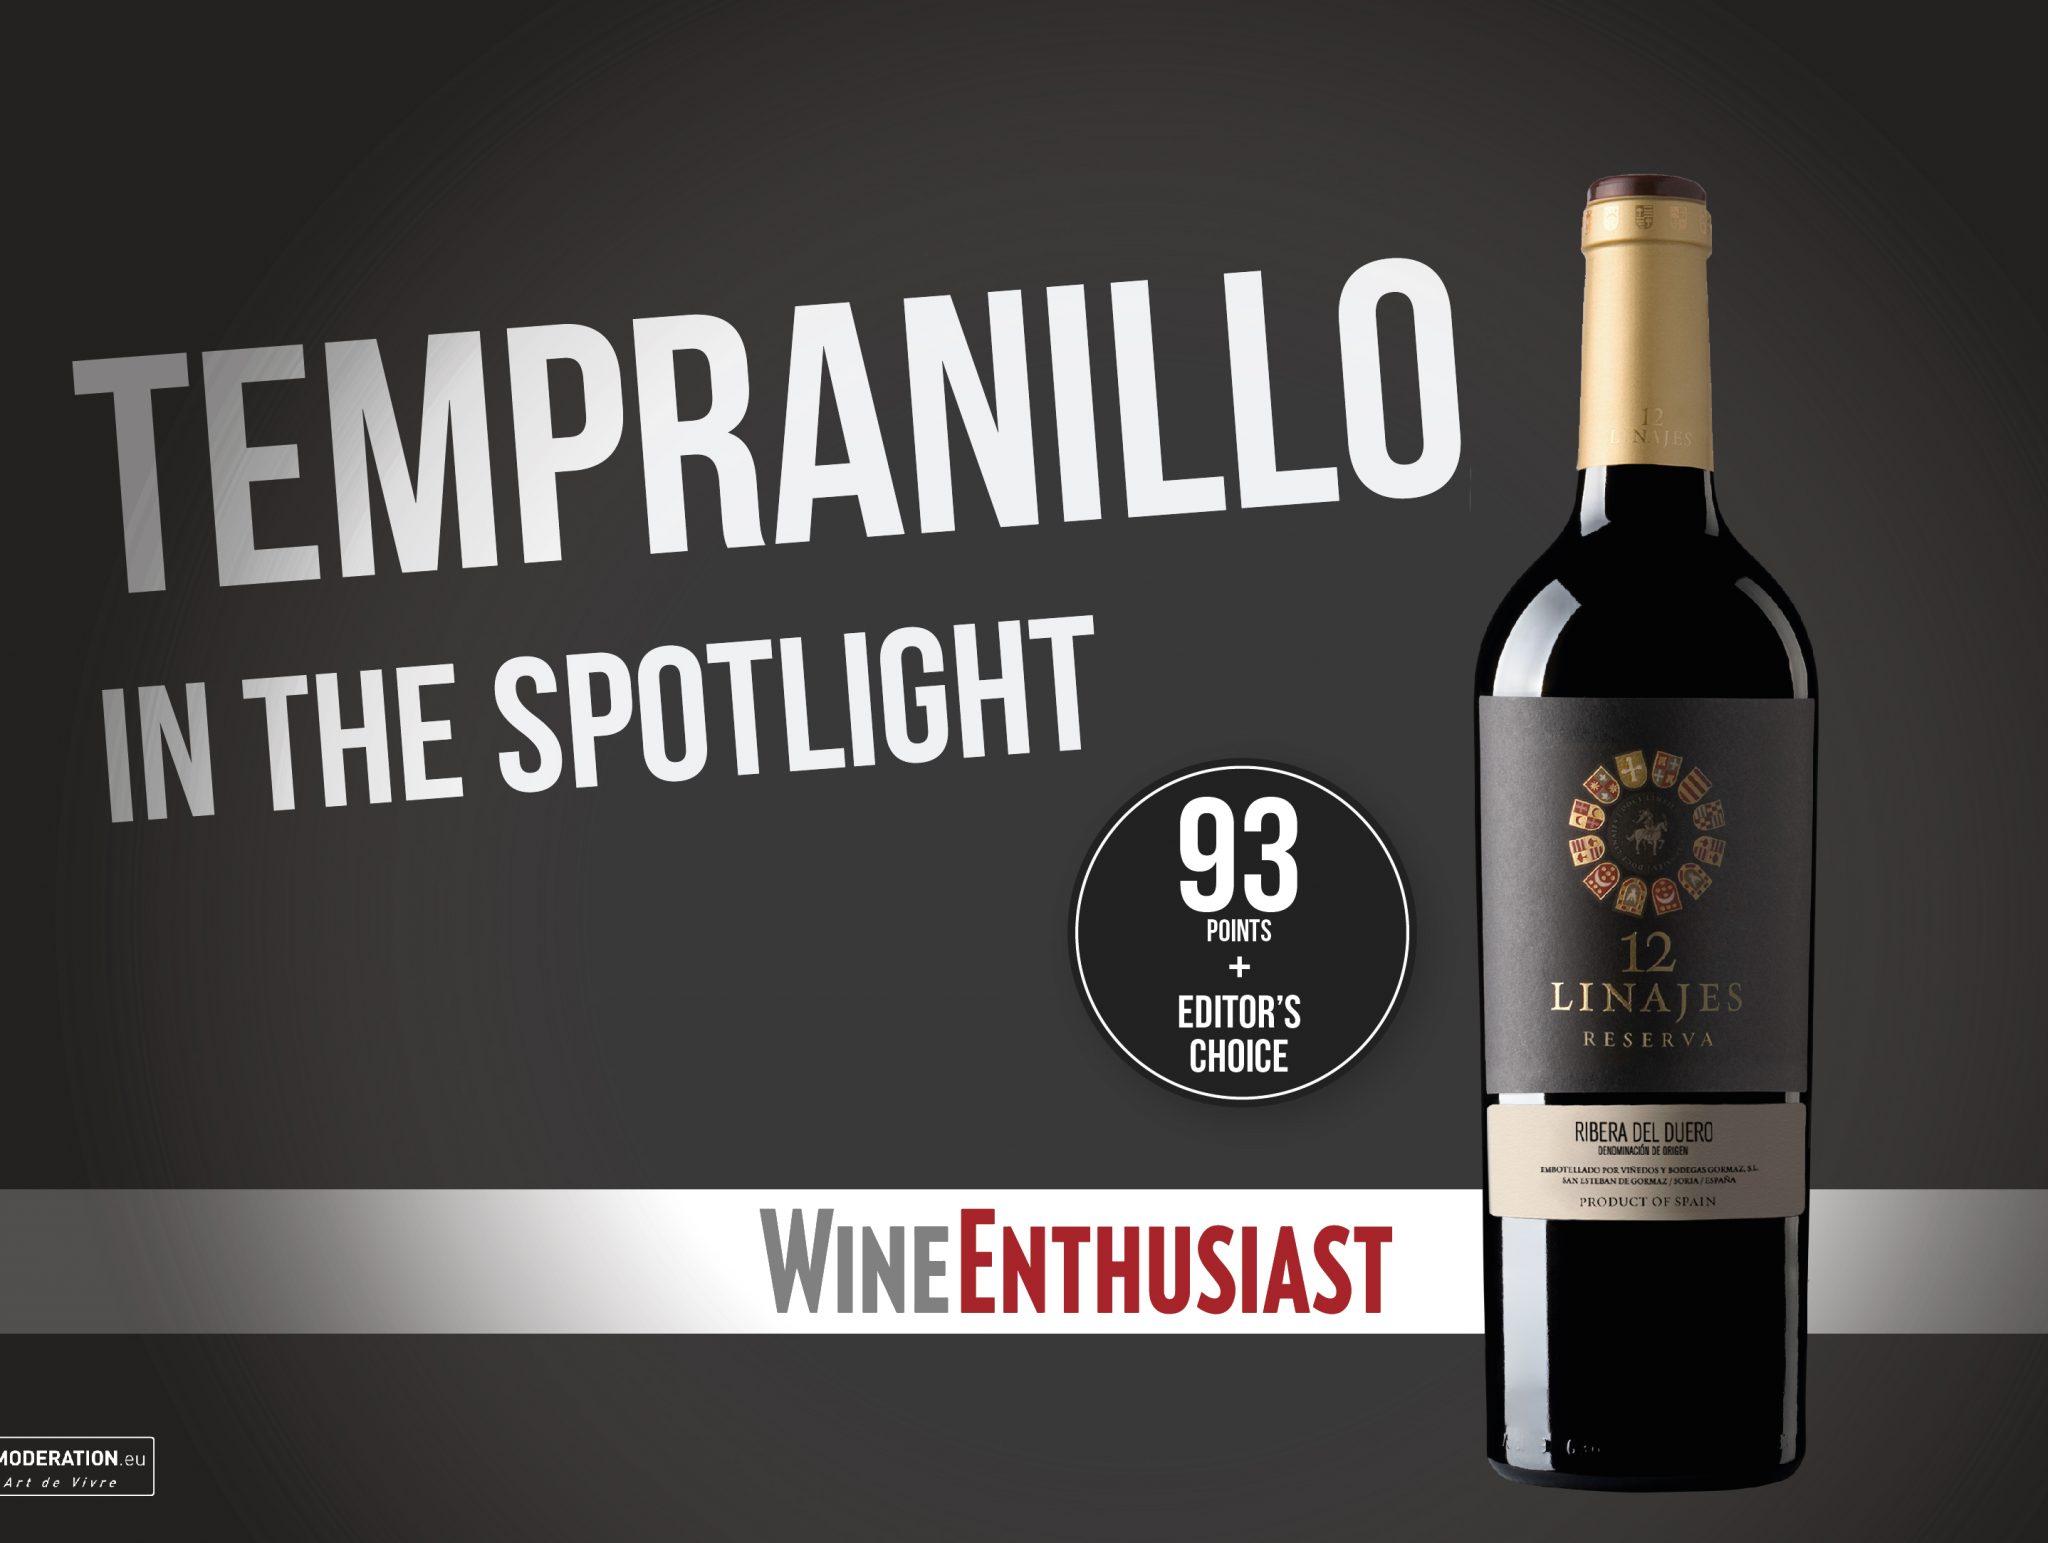 12 Linajes Reserva 2014, 93 points and “Editor’s Choice” in Wine Enthusiast.